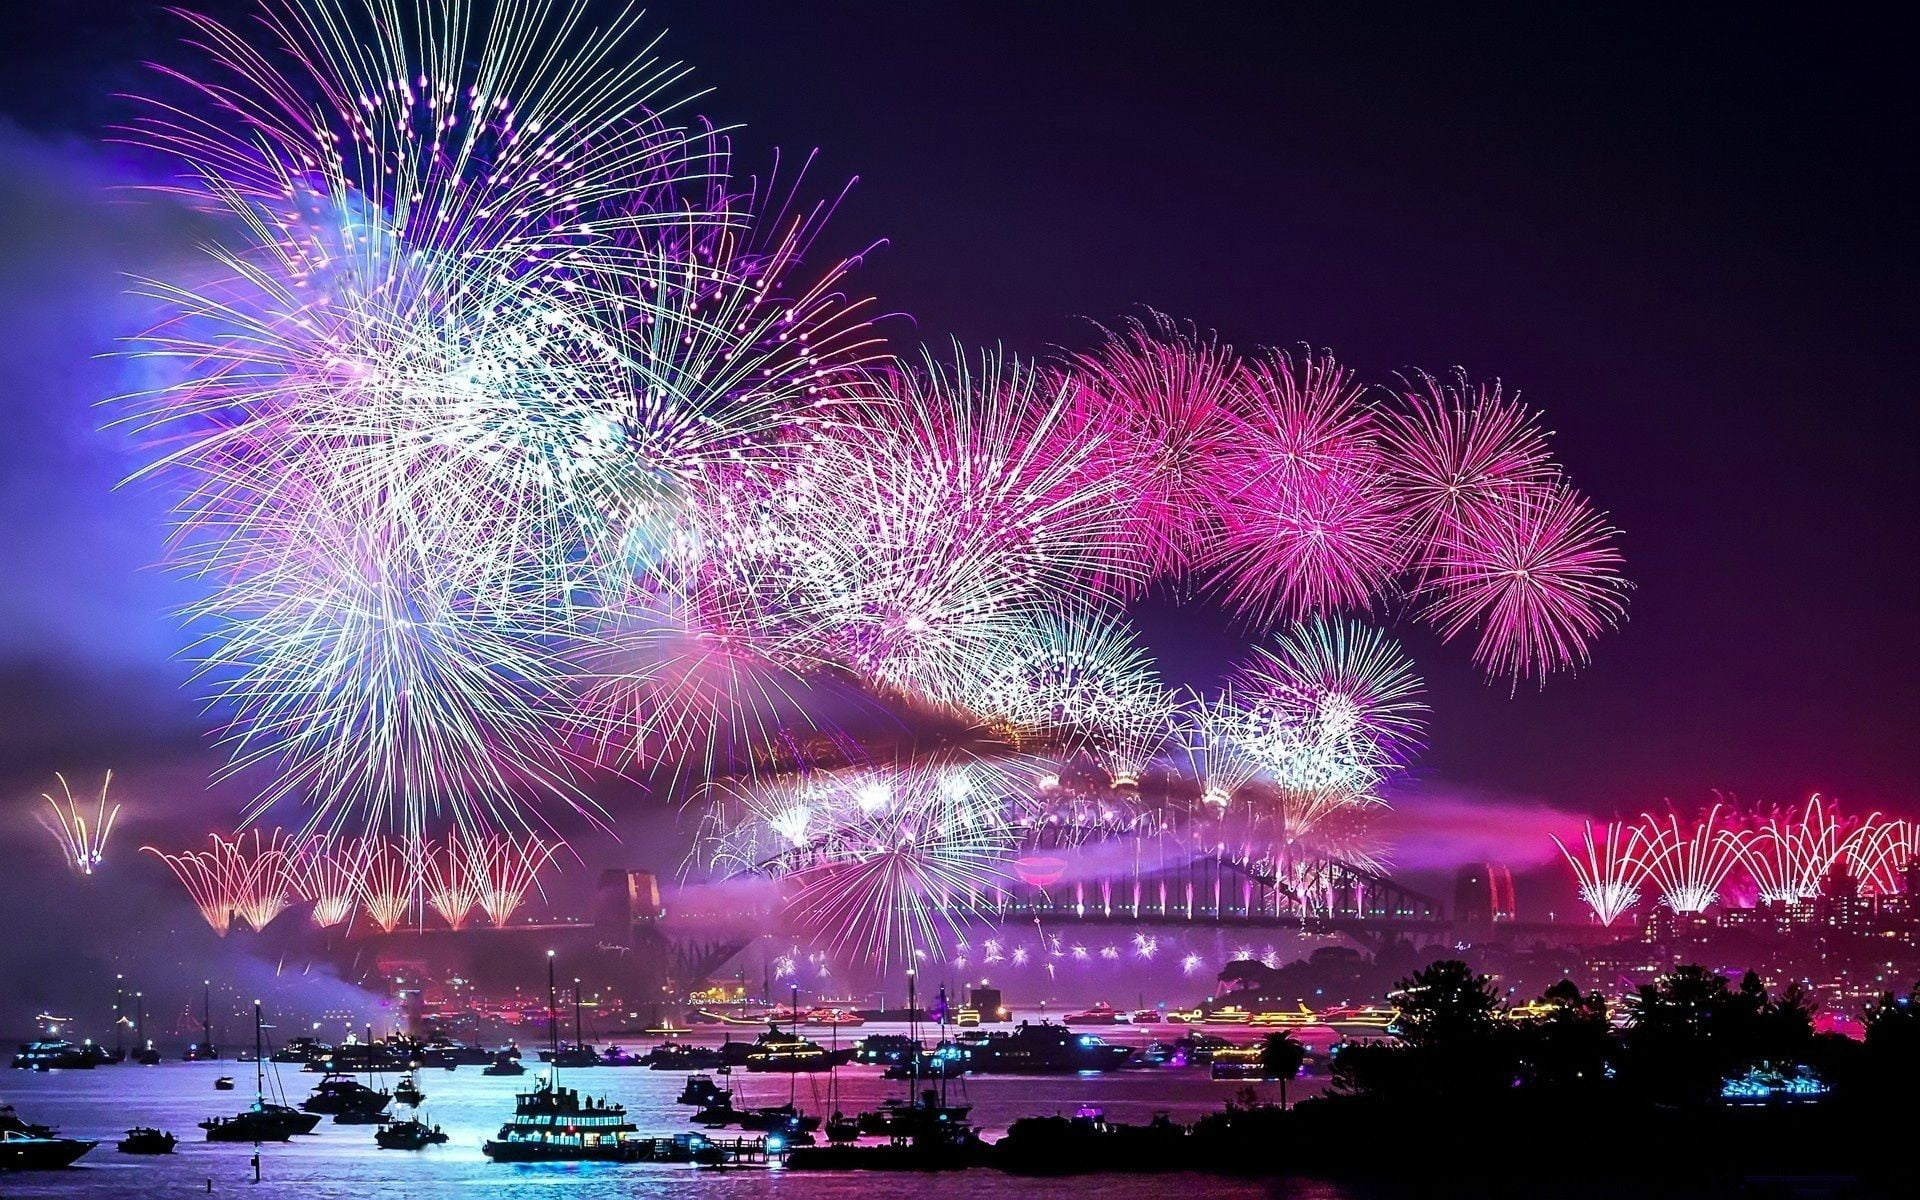 fireworks display at nighttime, fireworks, night, cityscape, boat